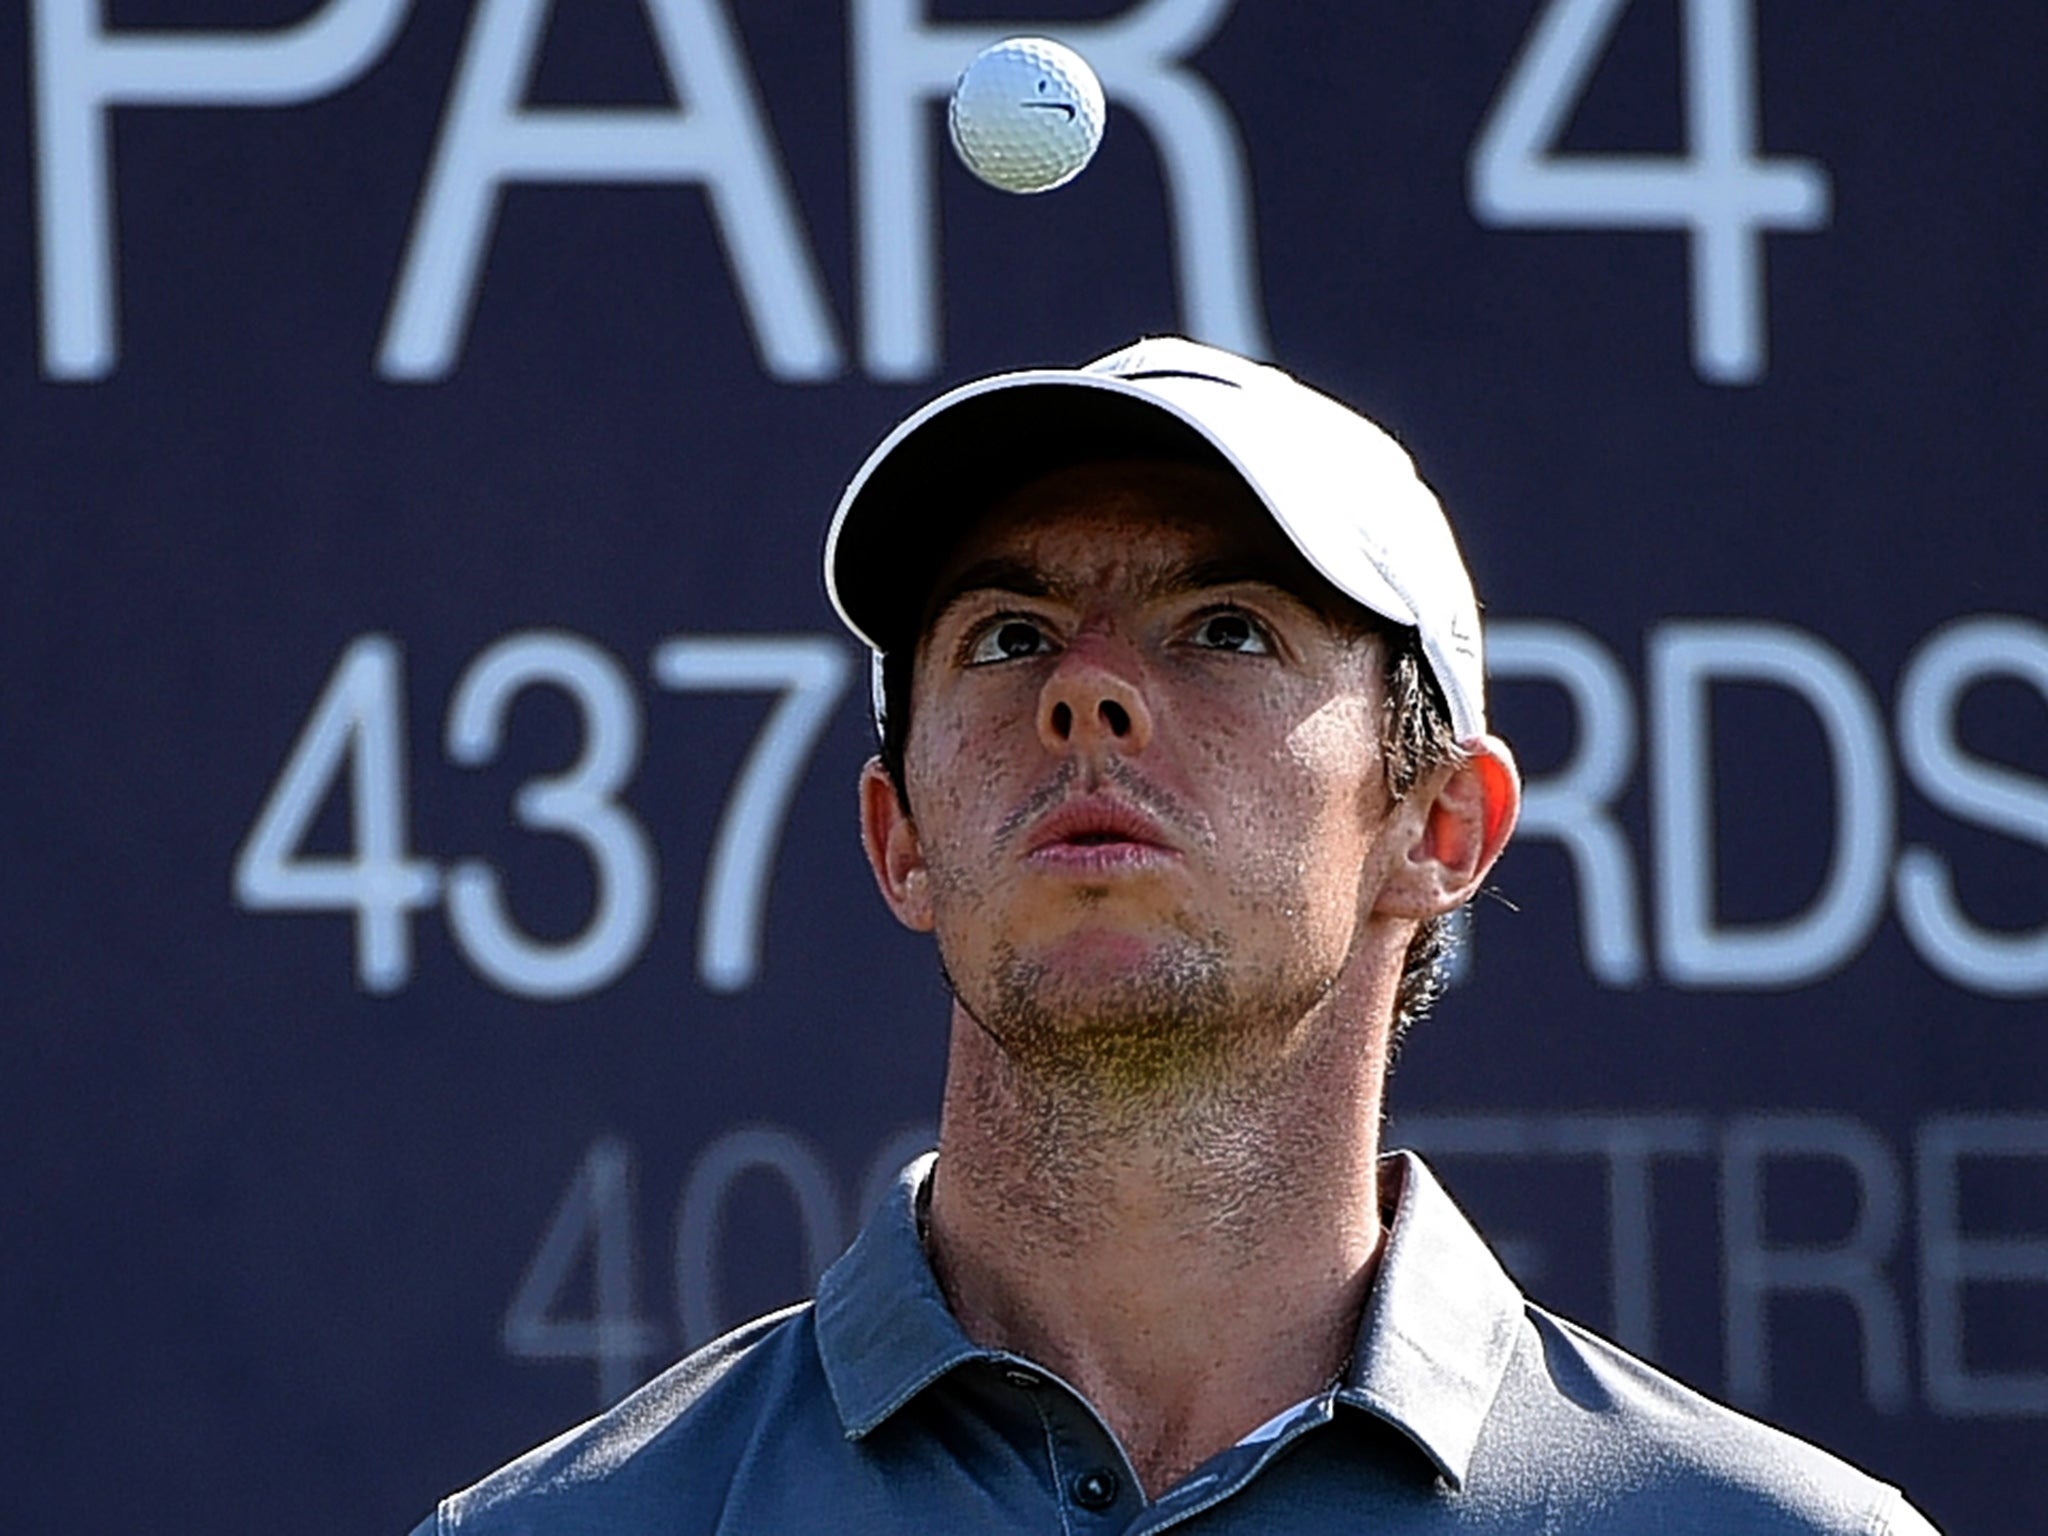 Rory McIlroy keeping his eyes on the ball during a pro-am event in Dubai